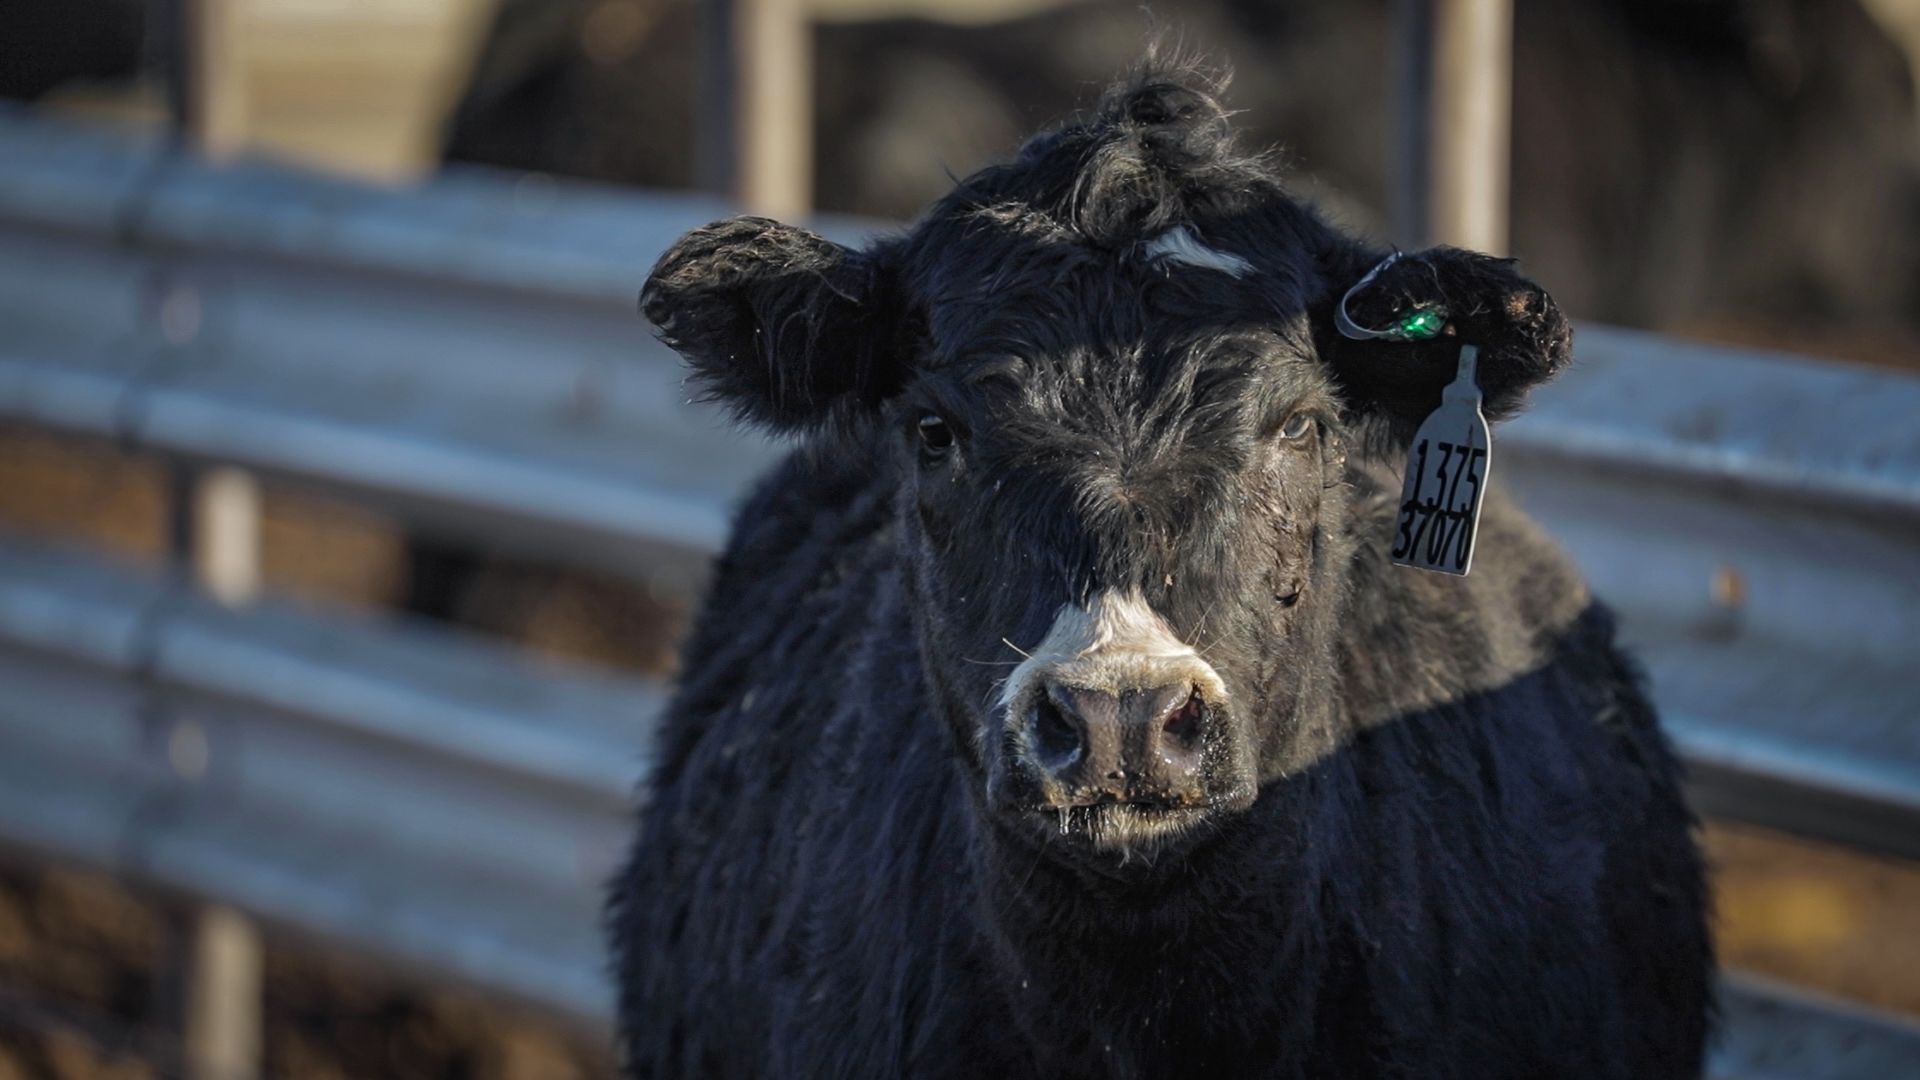 New ear tag technology shown to improve illness detection in cattle